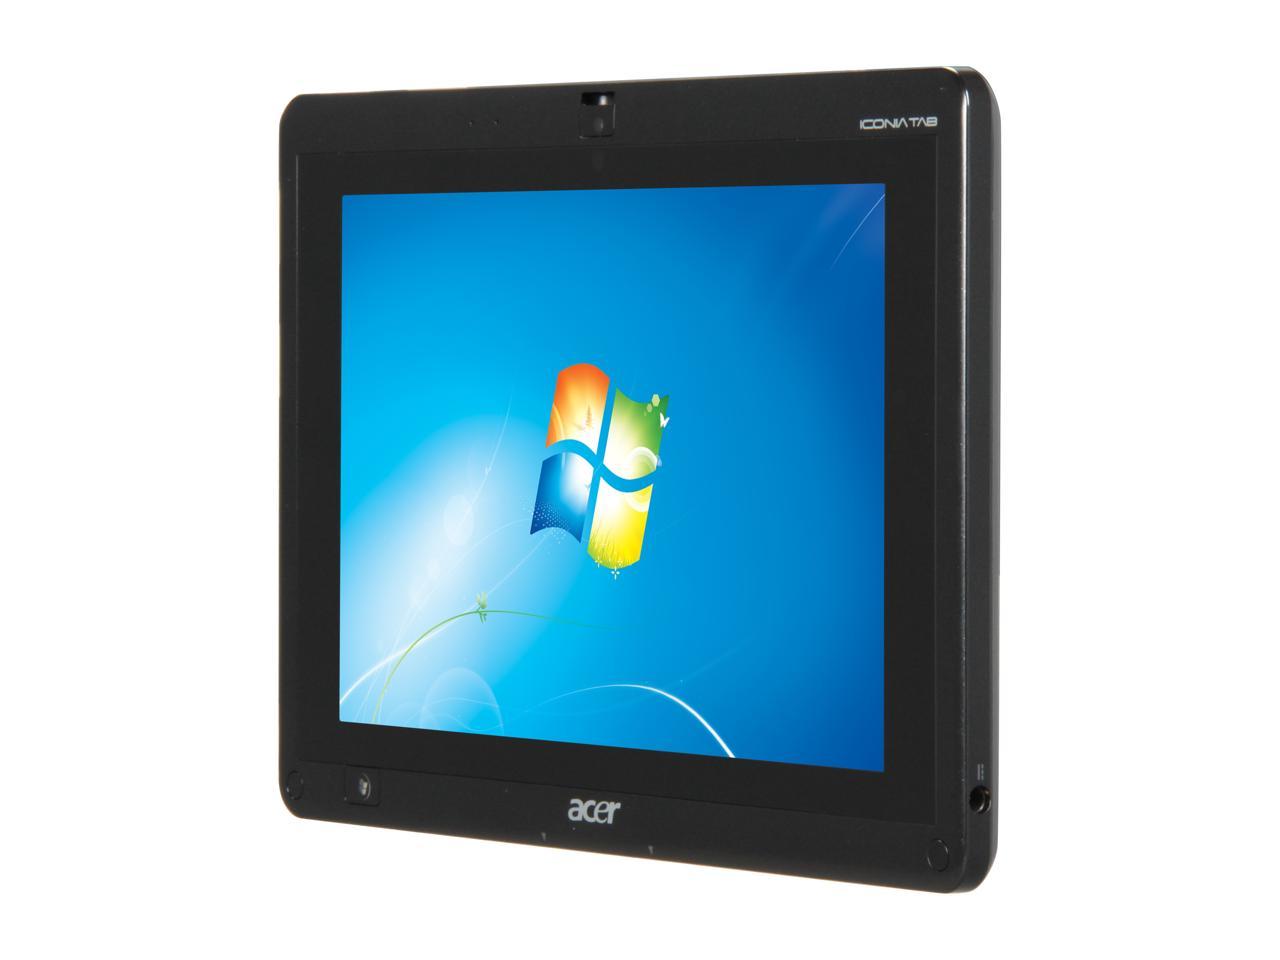 Acer Iconia Tab W500-BZ467 Tablet PC AMD Dual-Core Processor 